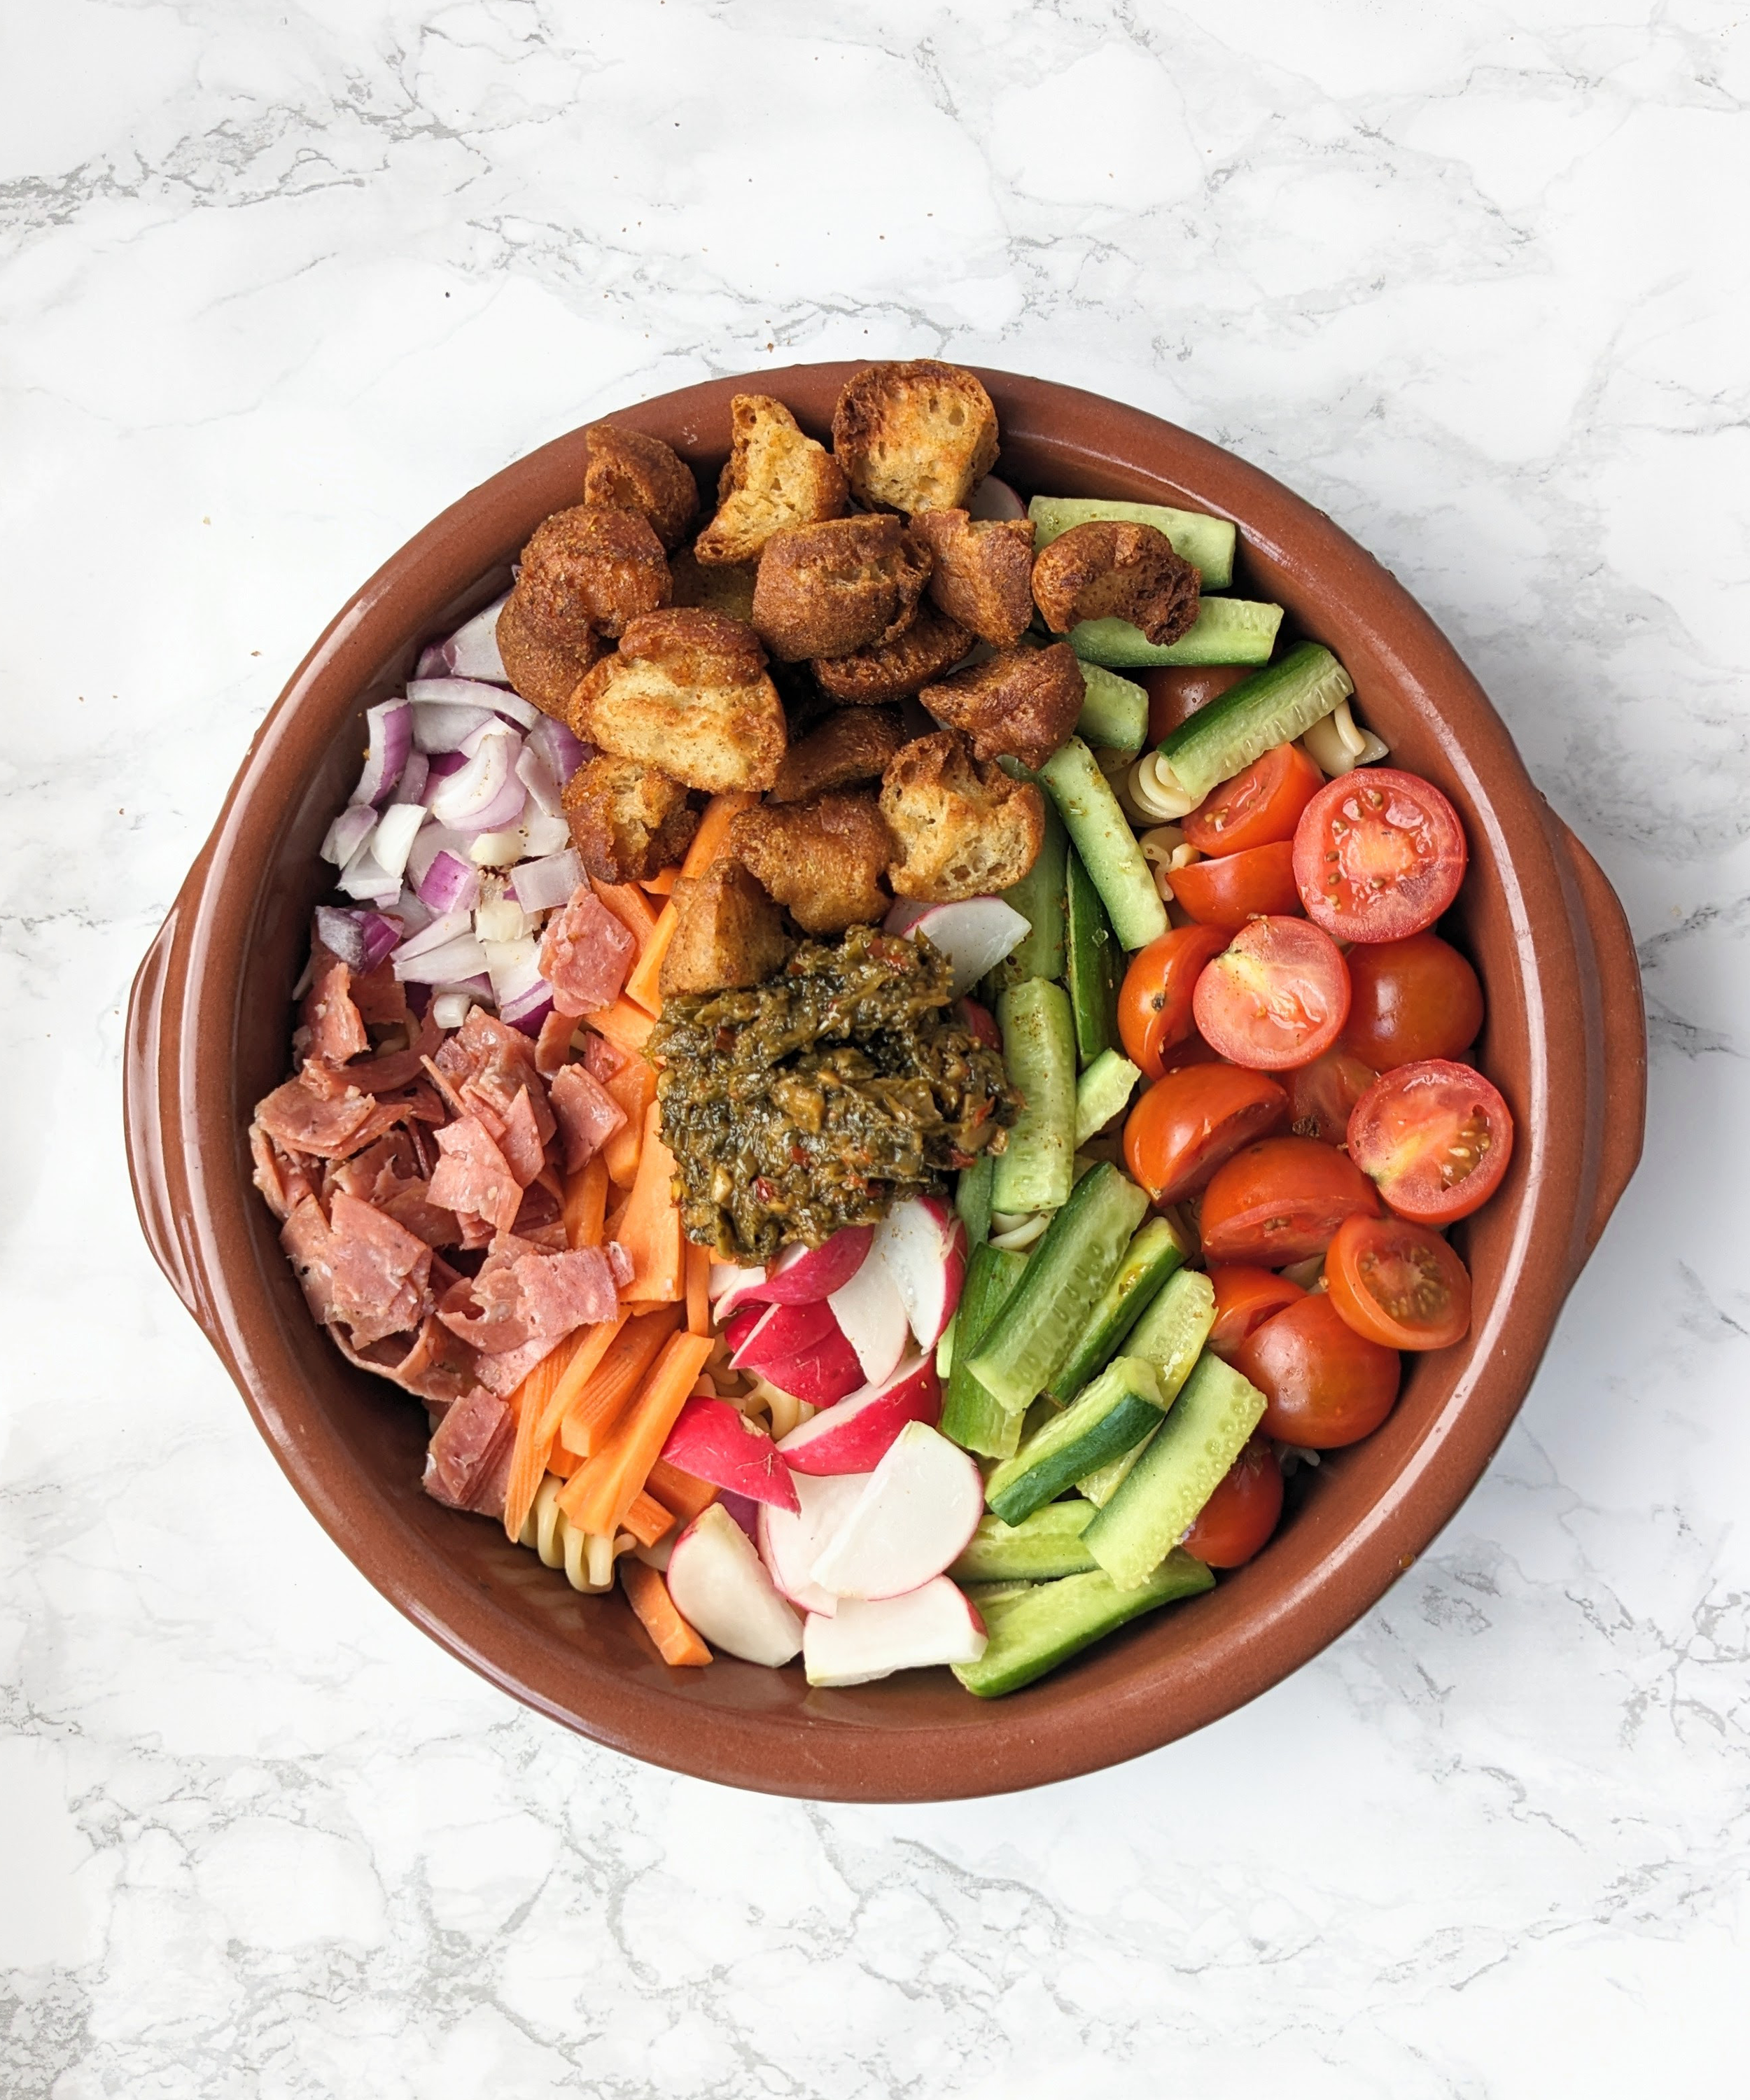 Pasta Salad with Puff Puff Croutons